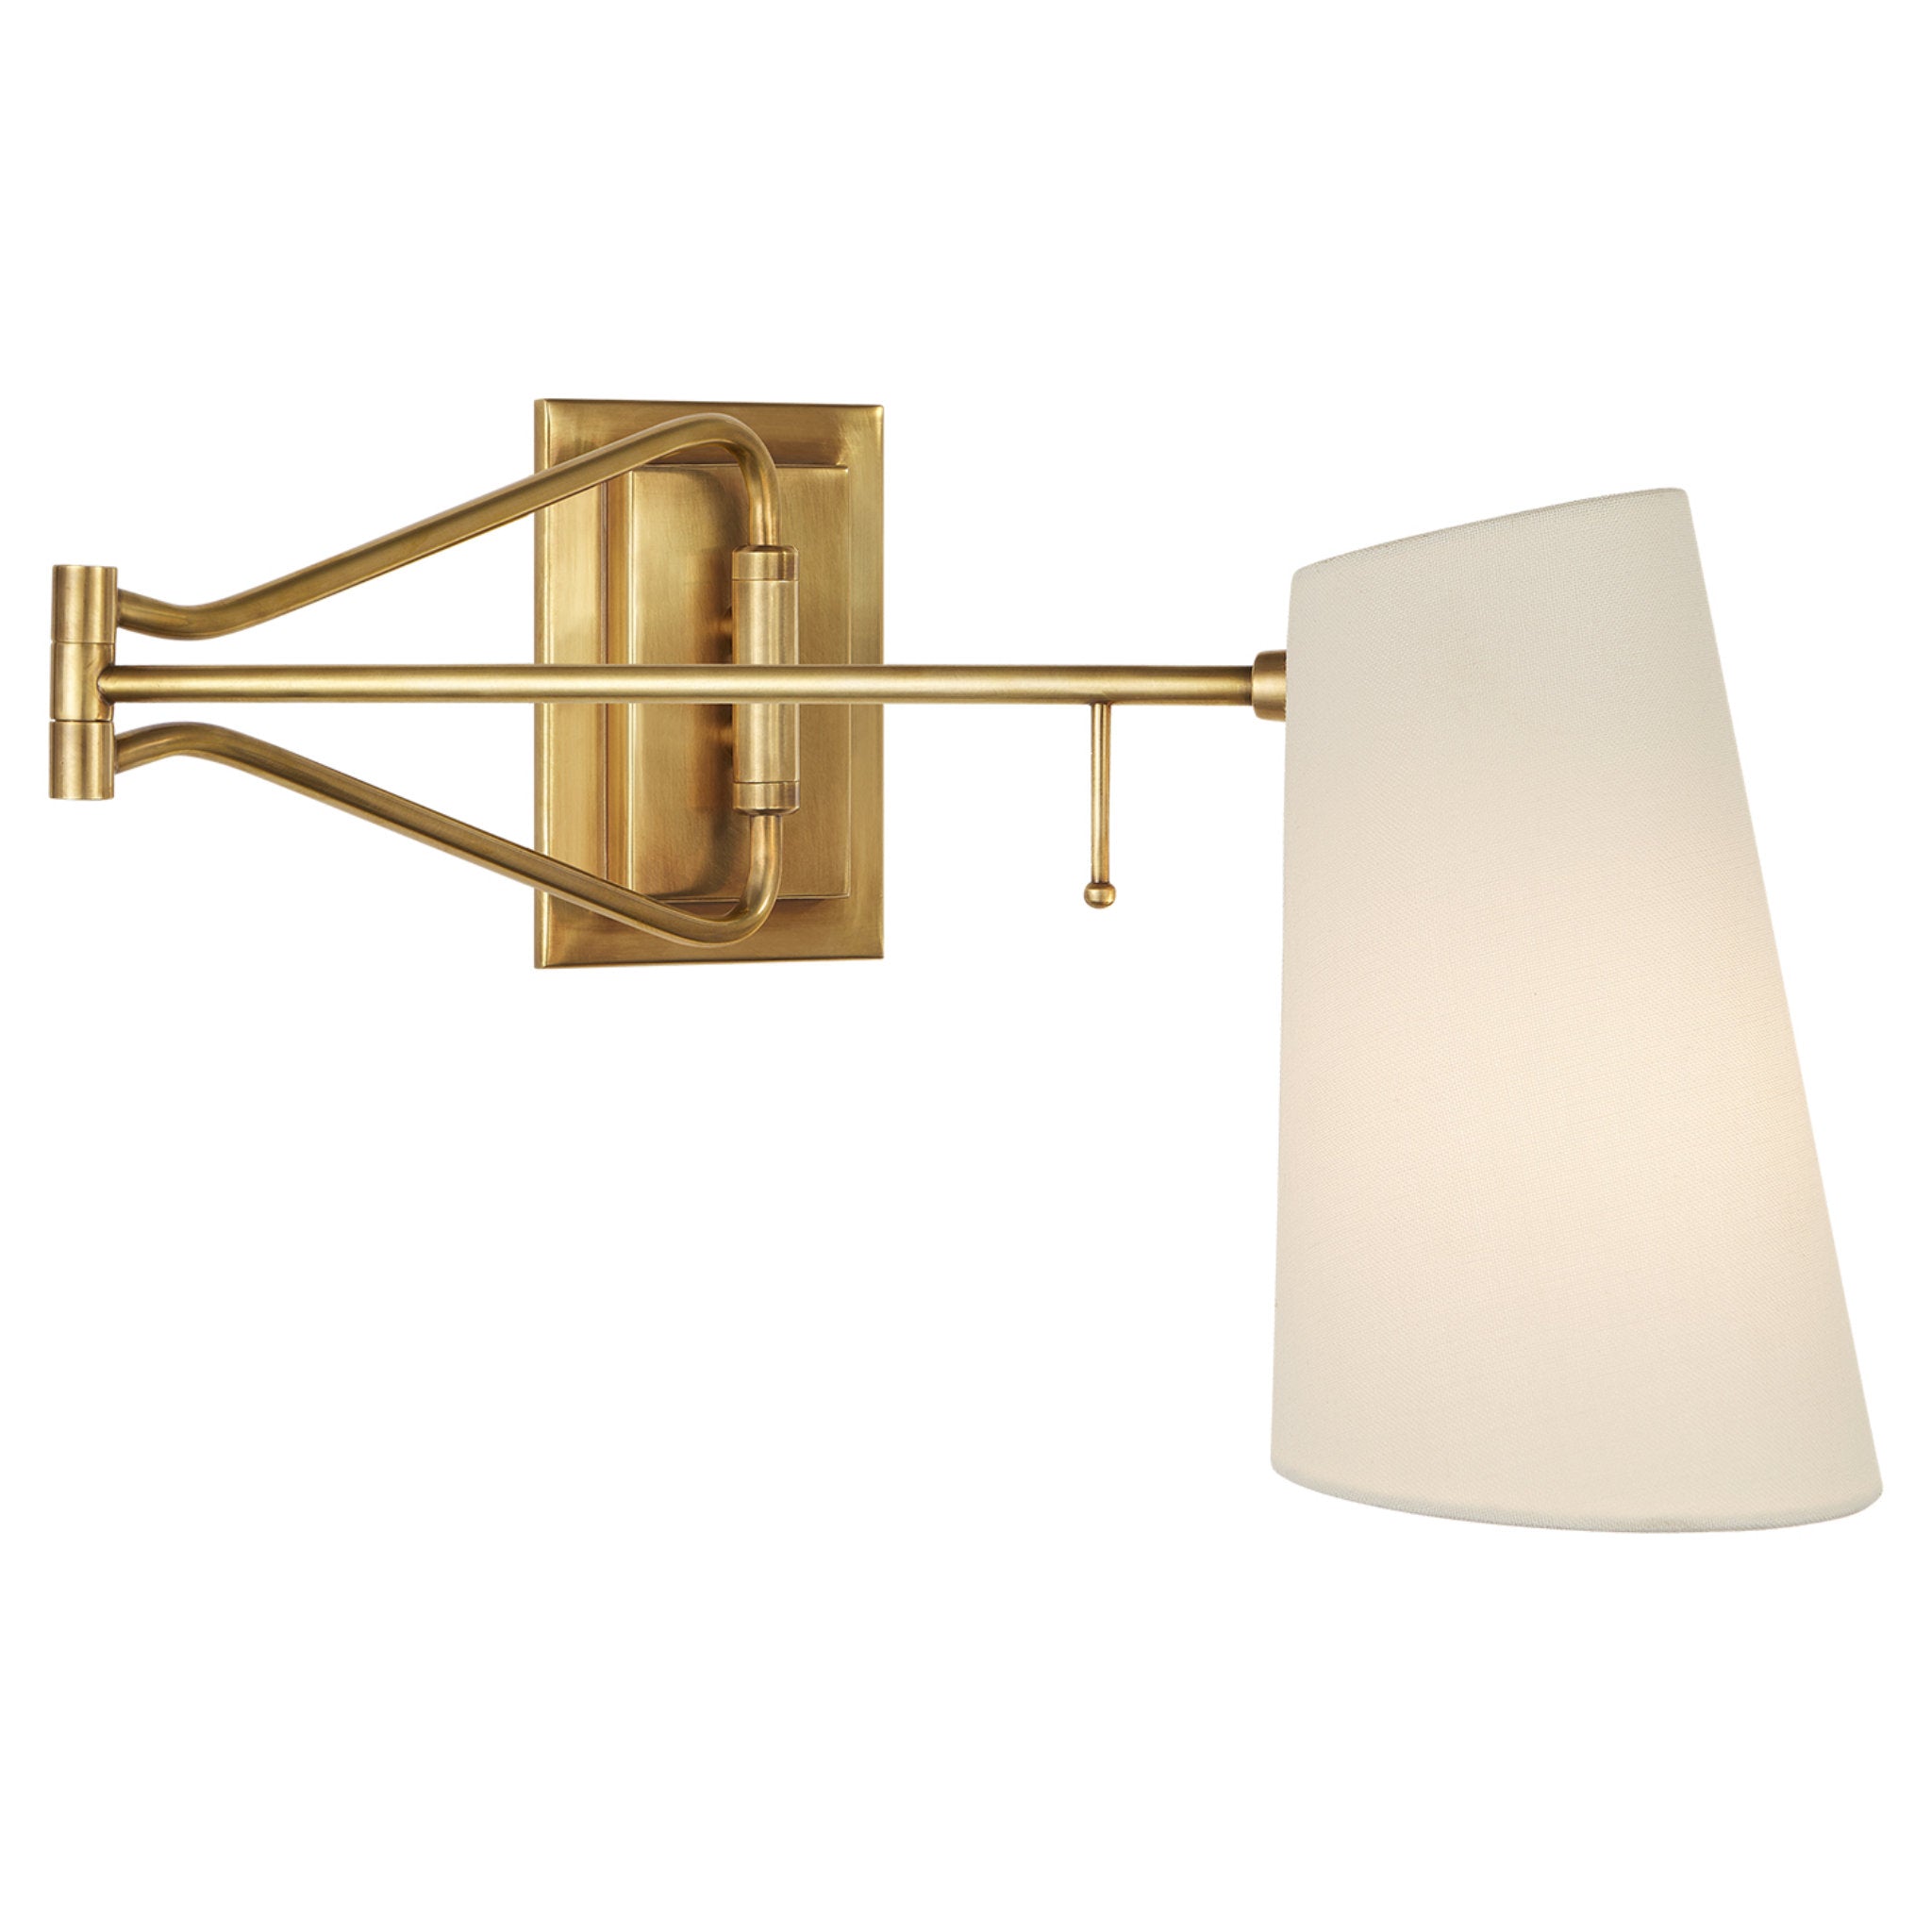 AERIN Keil Swing Arm Wall Light in Hand-Rubbed Antique Brass with Linen Shade